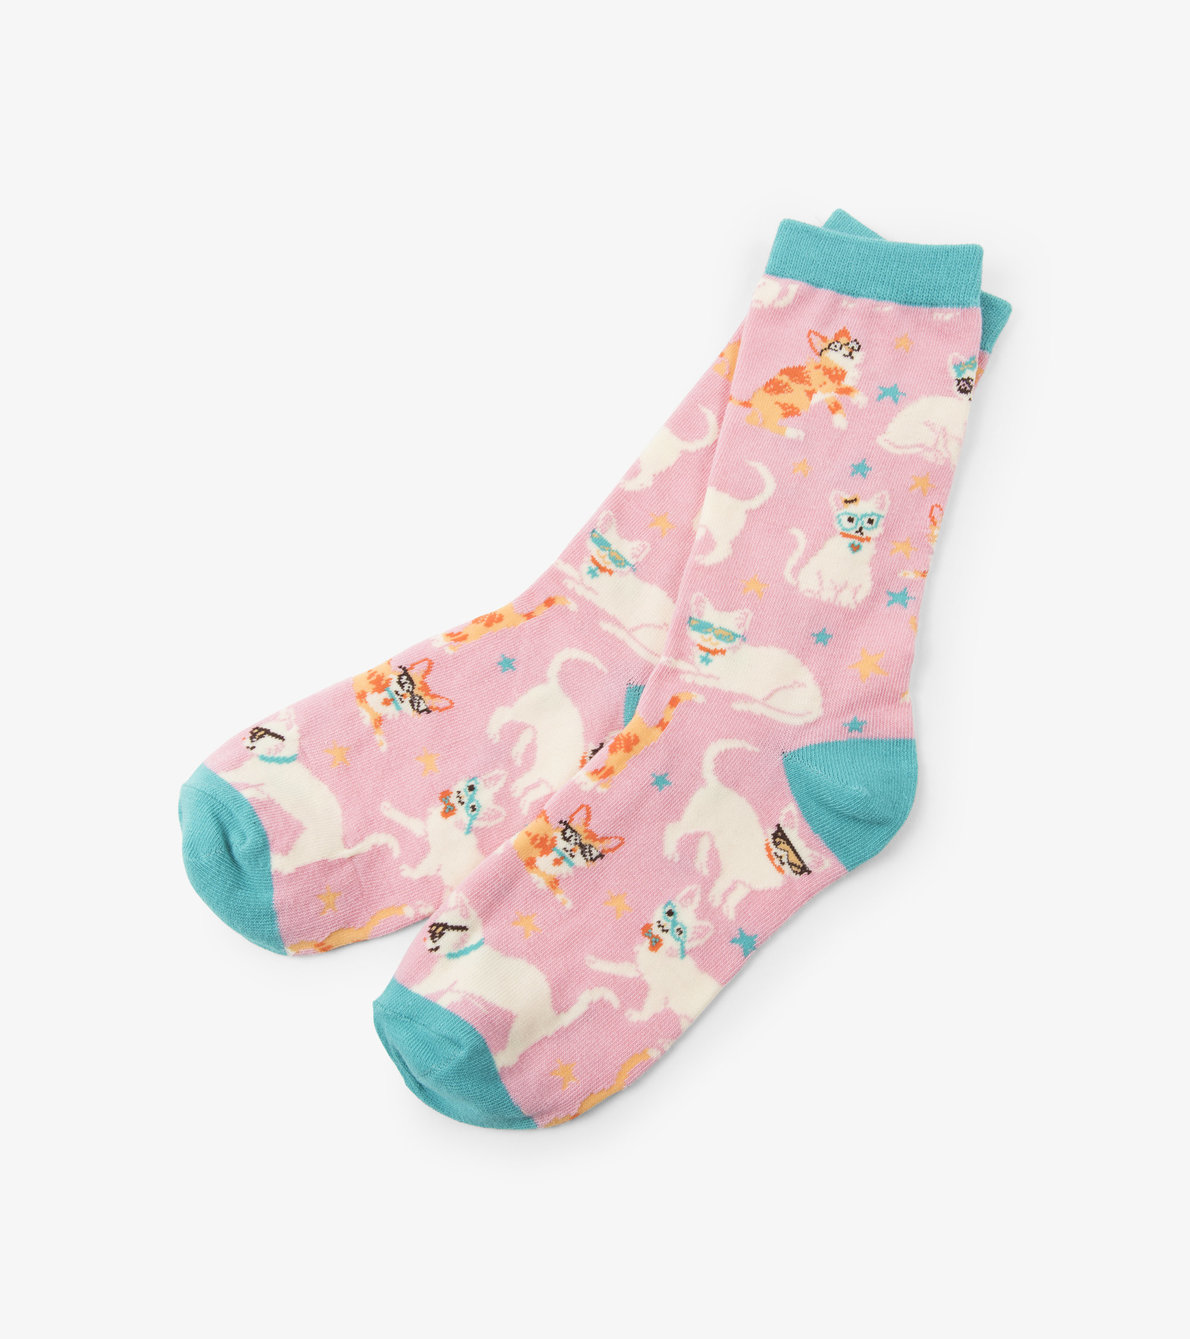 View larger image of Cool Cats Women's Crew Socks